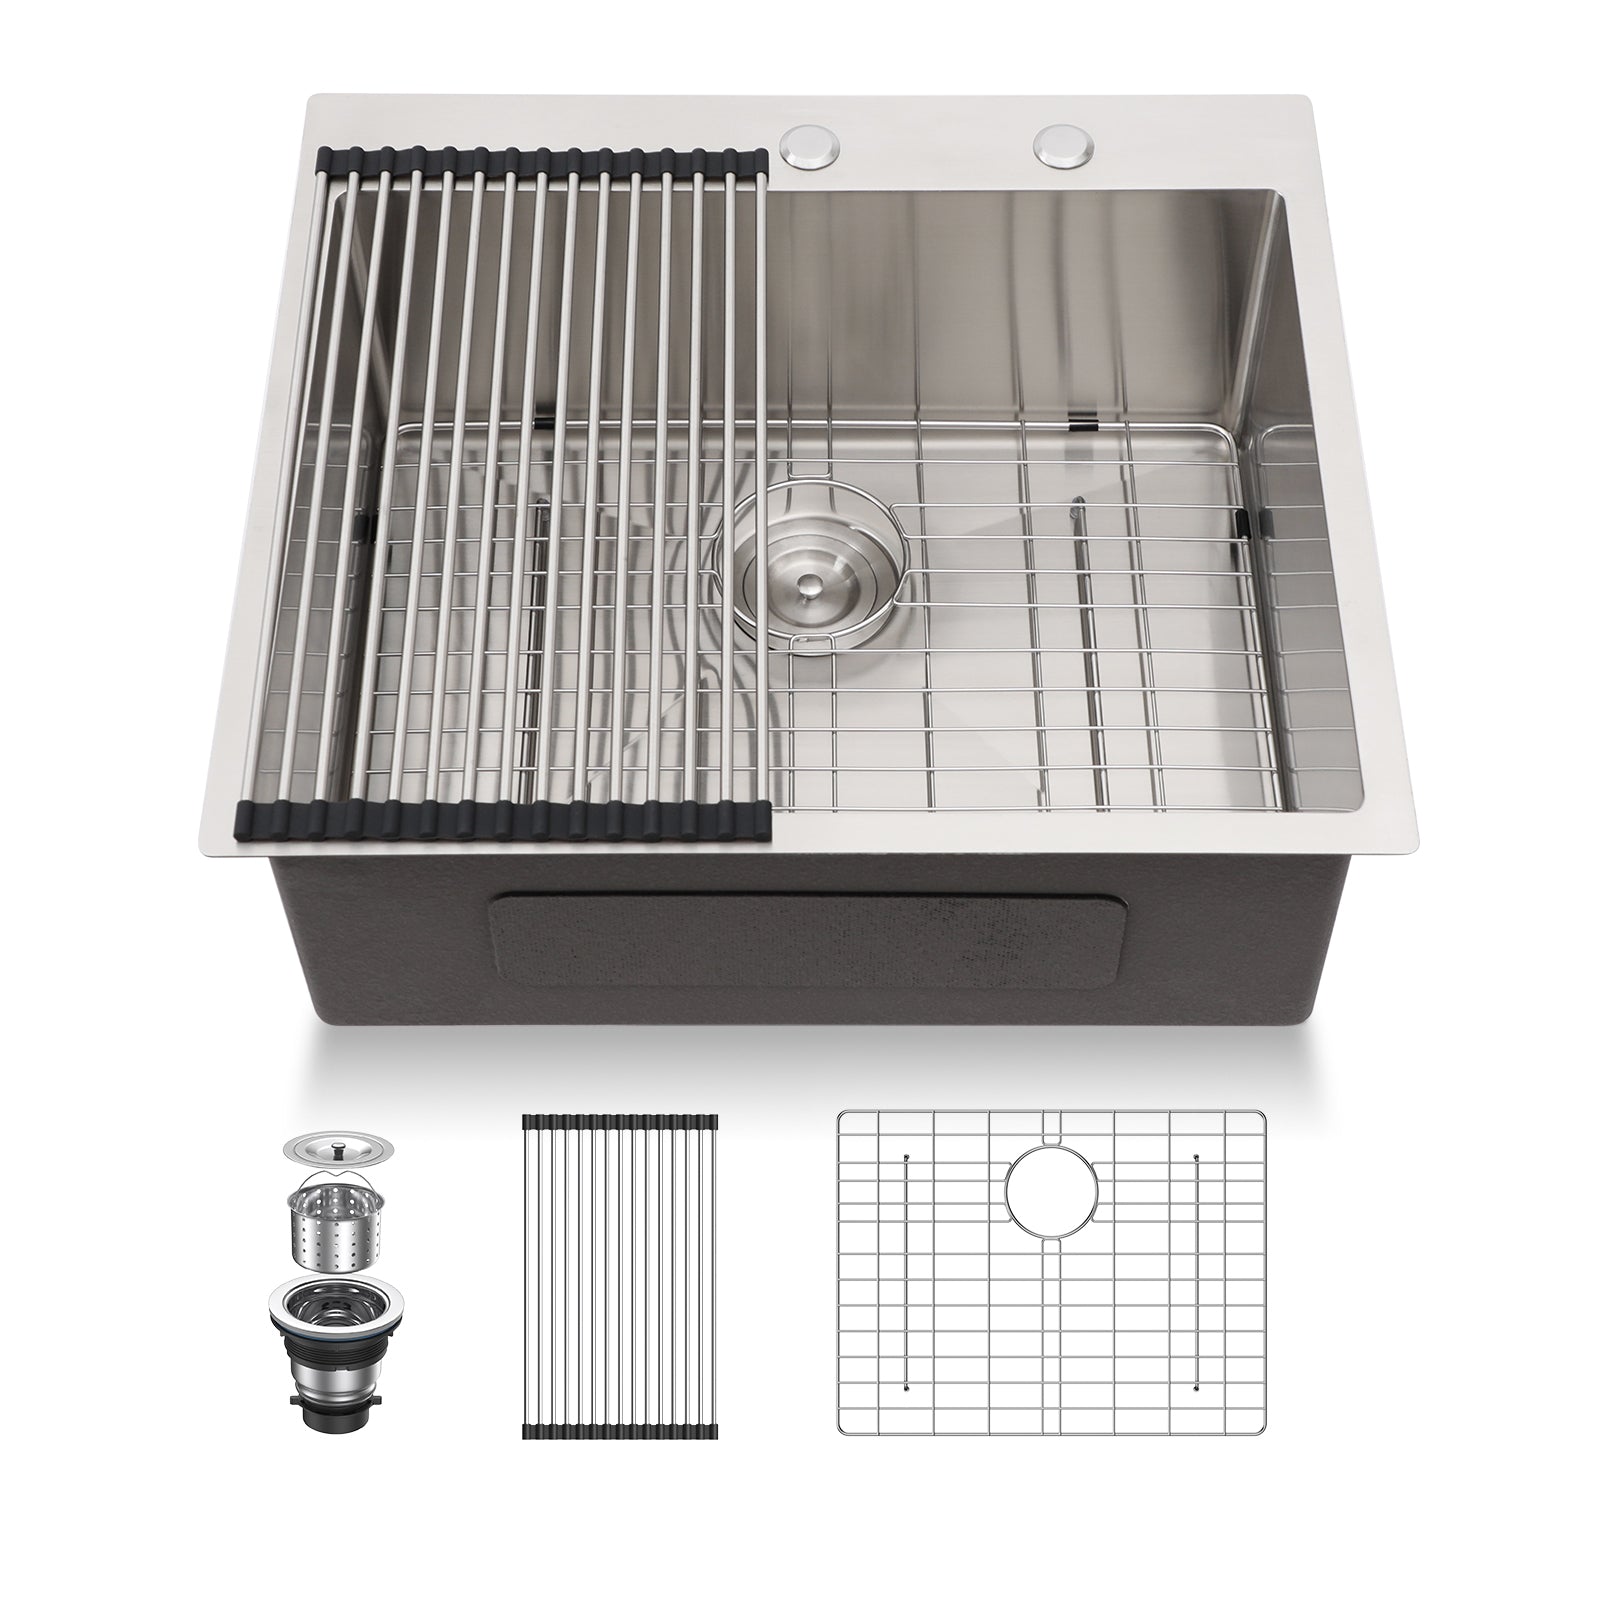 Lordear 25/28/33 Inch Drop In Kitchen Sink 16 Gauge Stainless Steel Kitchen Sink Topmount Single Bowl Sink with Rack,Drain Assembly and Grid from Lordear